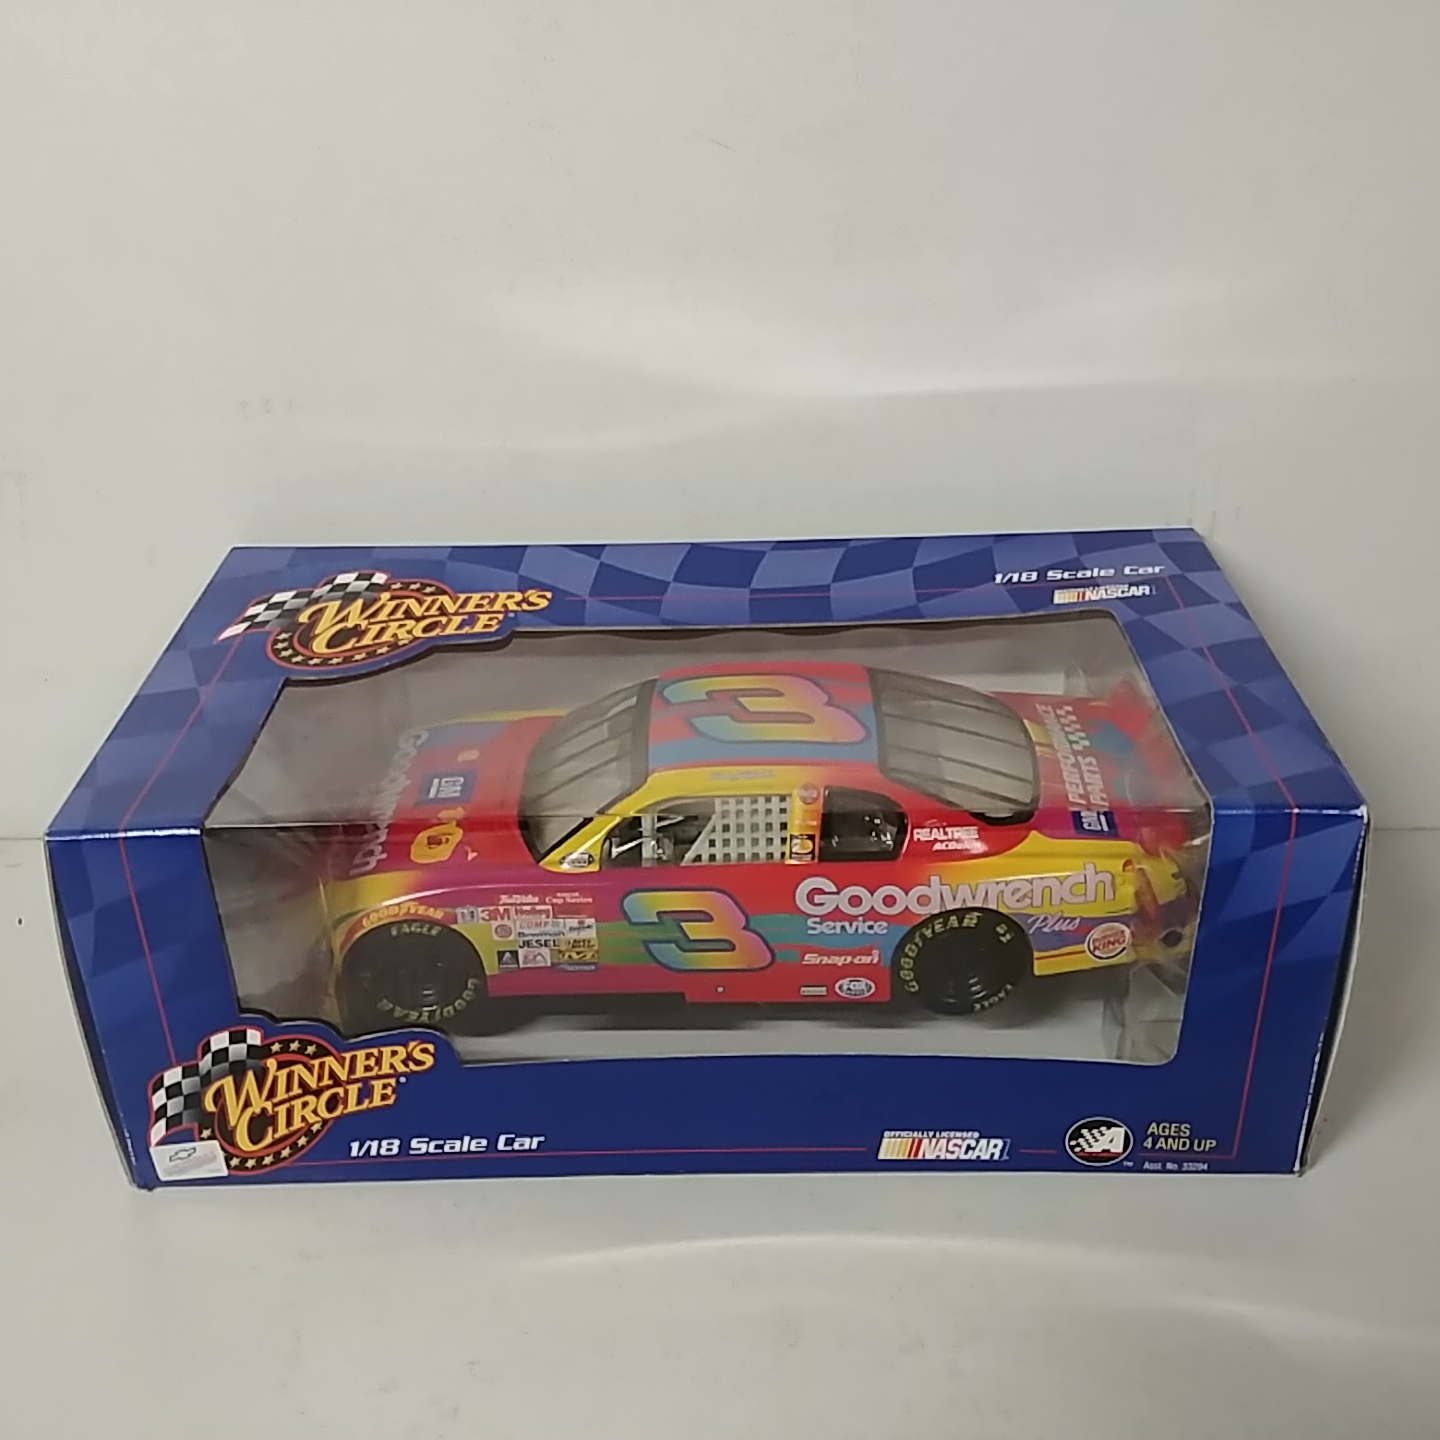 2000 Dale Earnhardt 1/18th Goodwrench "Peter Max" Monte Carlo